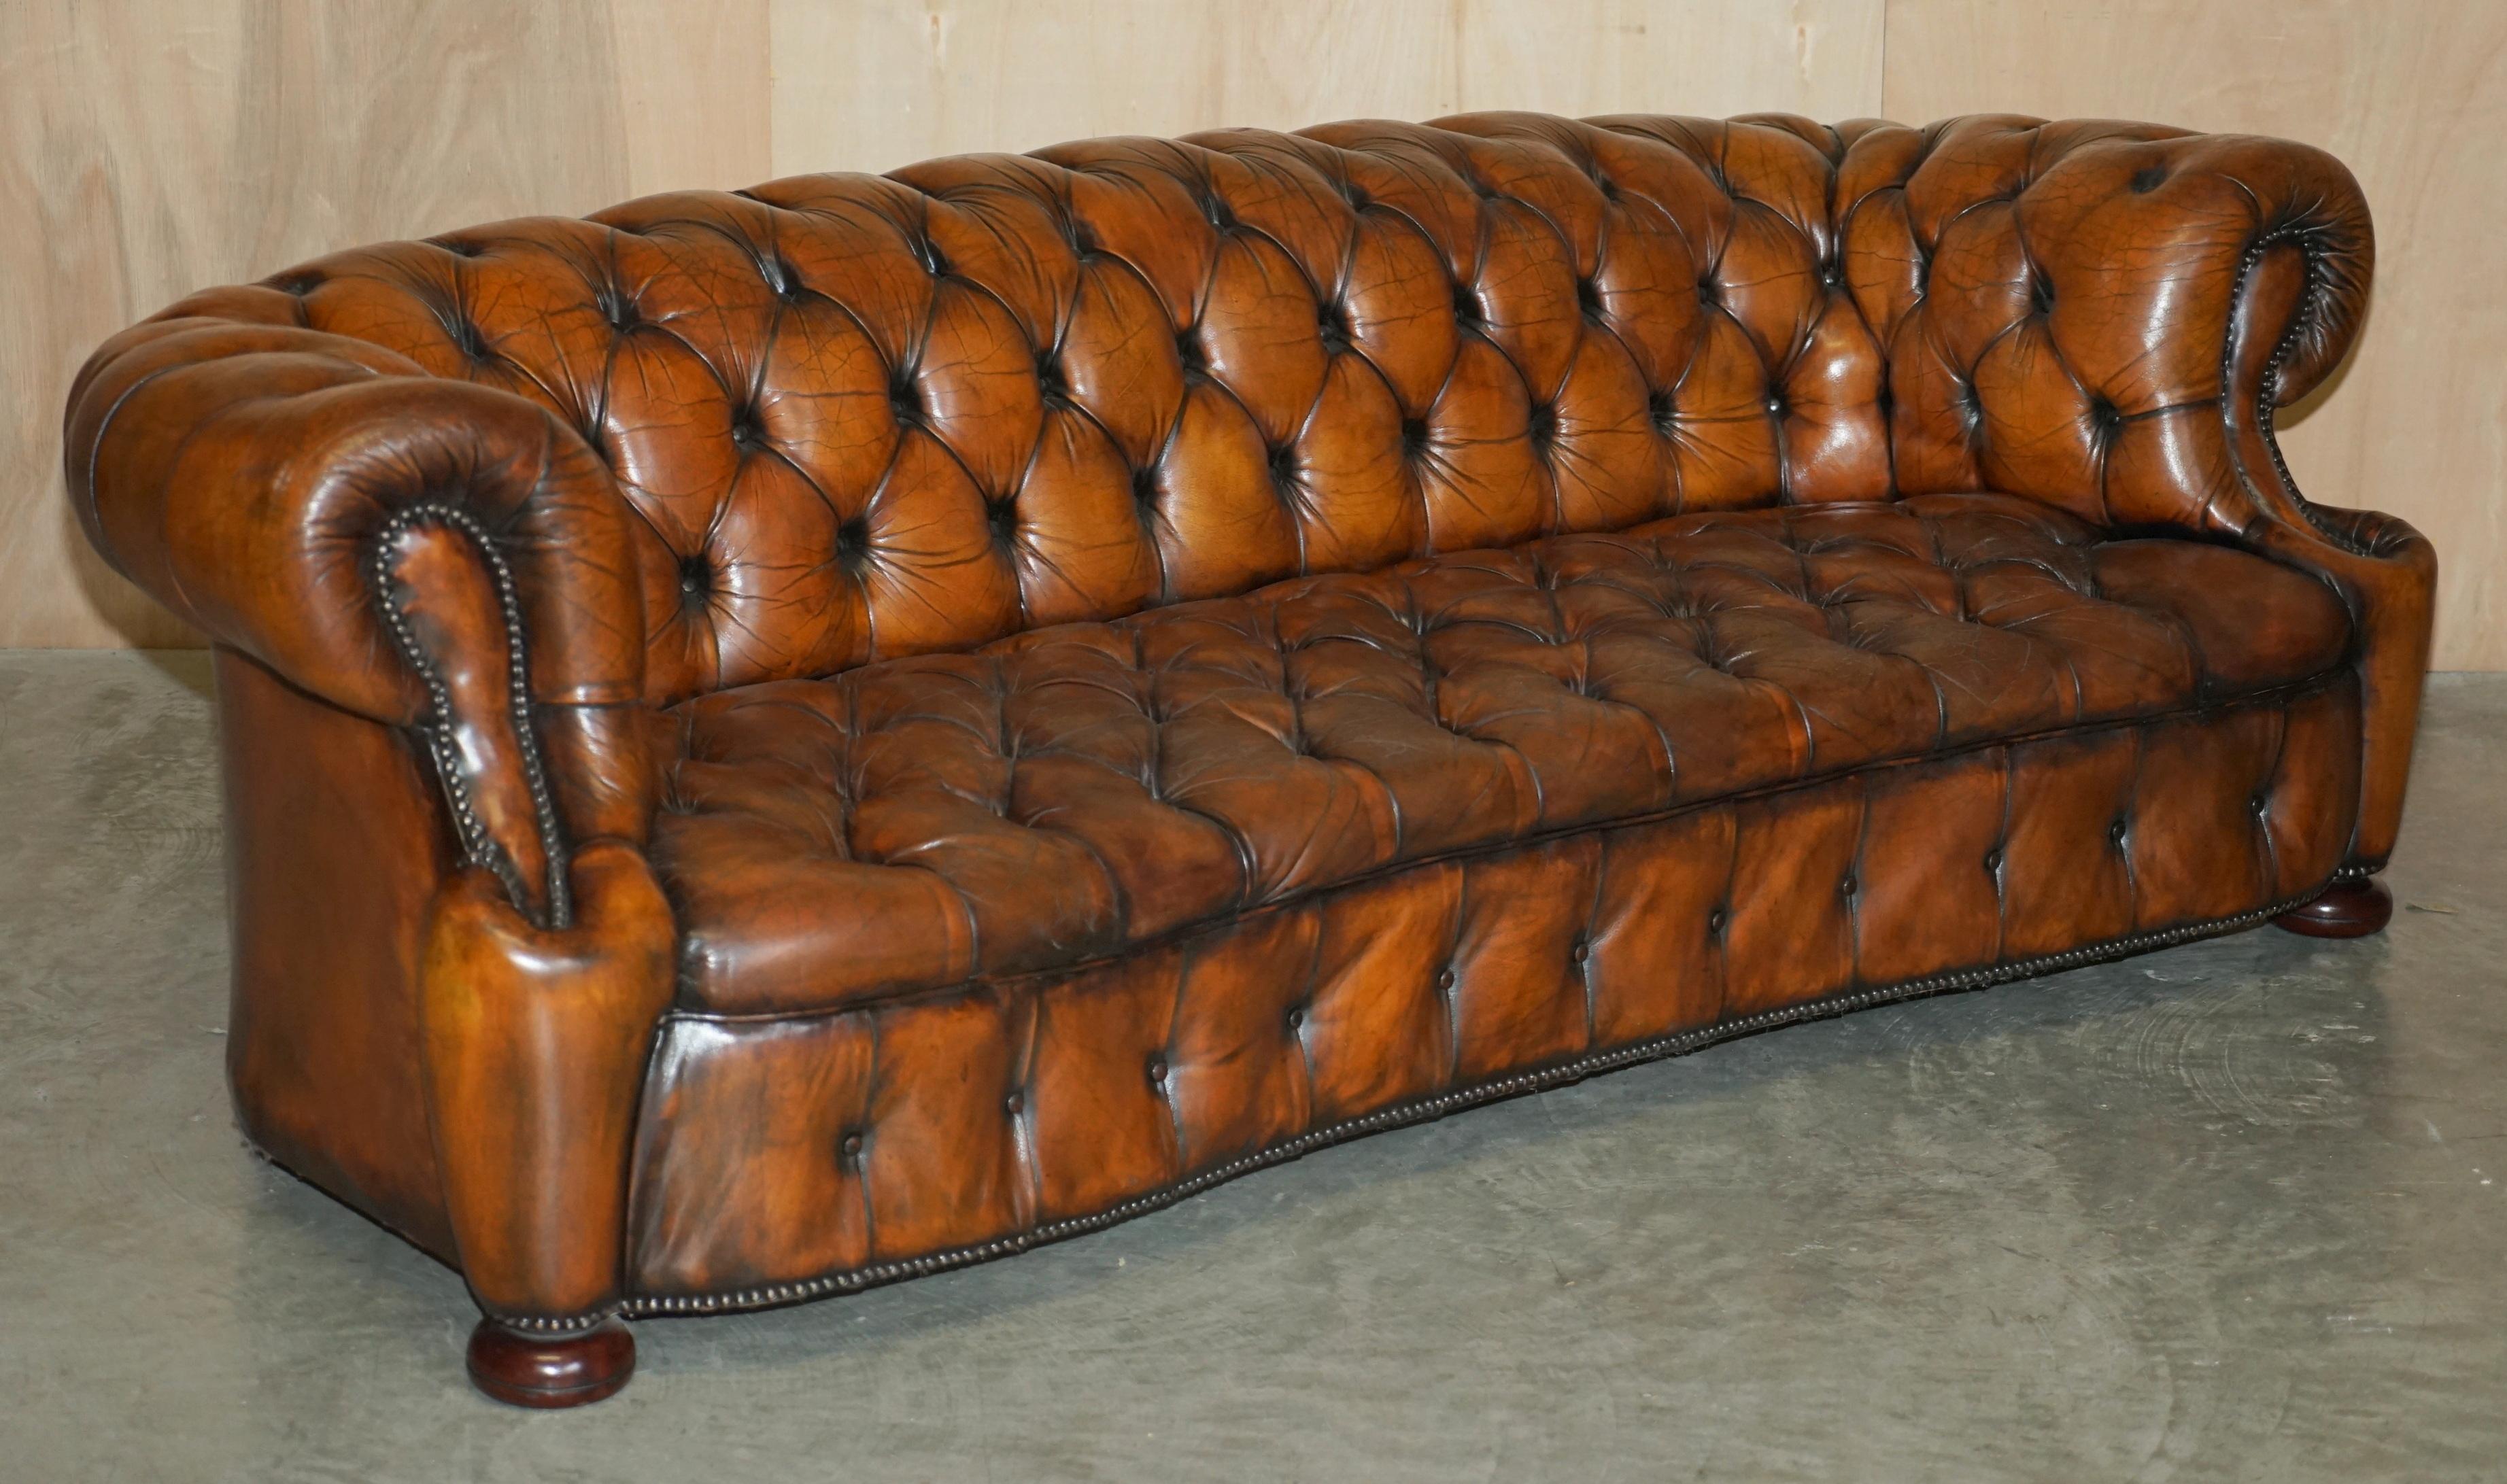 We are delighted to offer for sale this stunning, fully restored Vintage, hand dyed cigar brown leather serpentine fronted Chesterfield club sofa.

This sofa is very unique, it has a wonderful curved front edge which in the world of Chesterfield